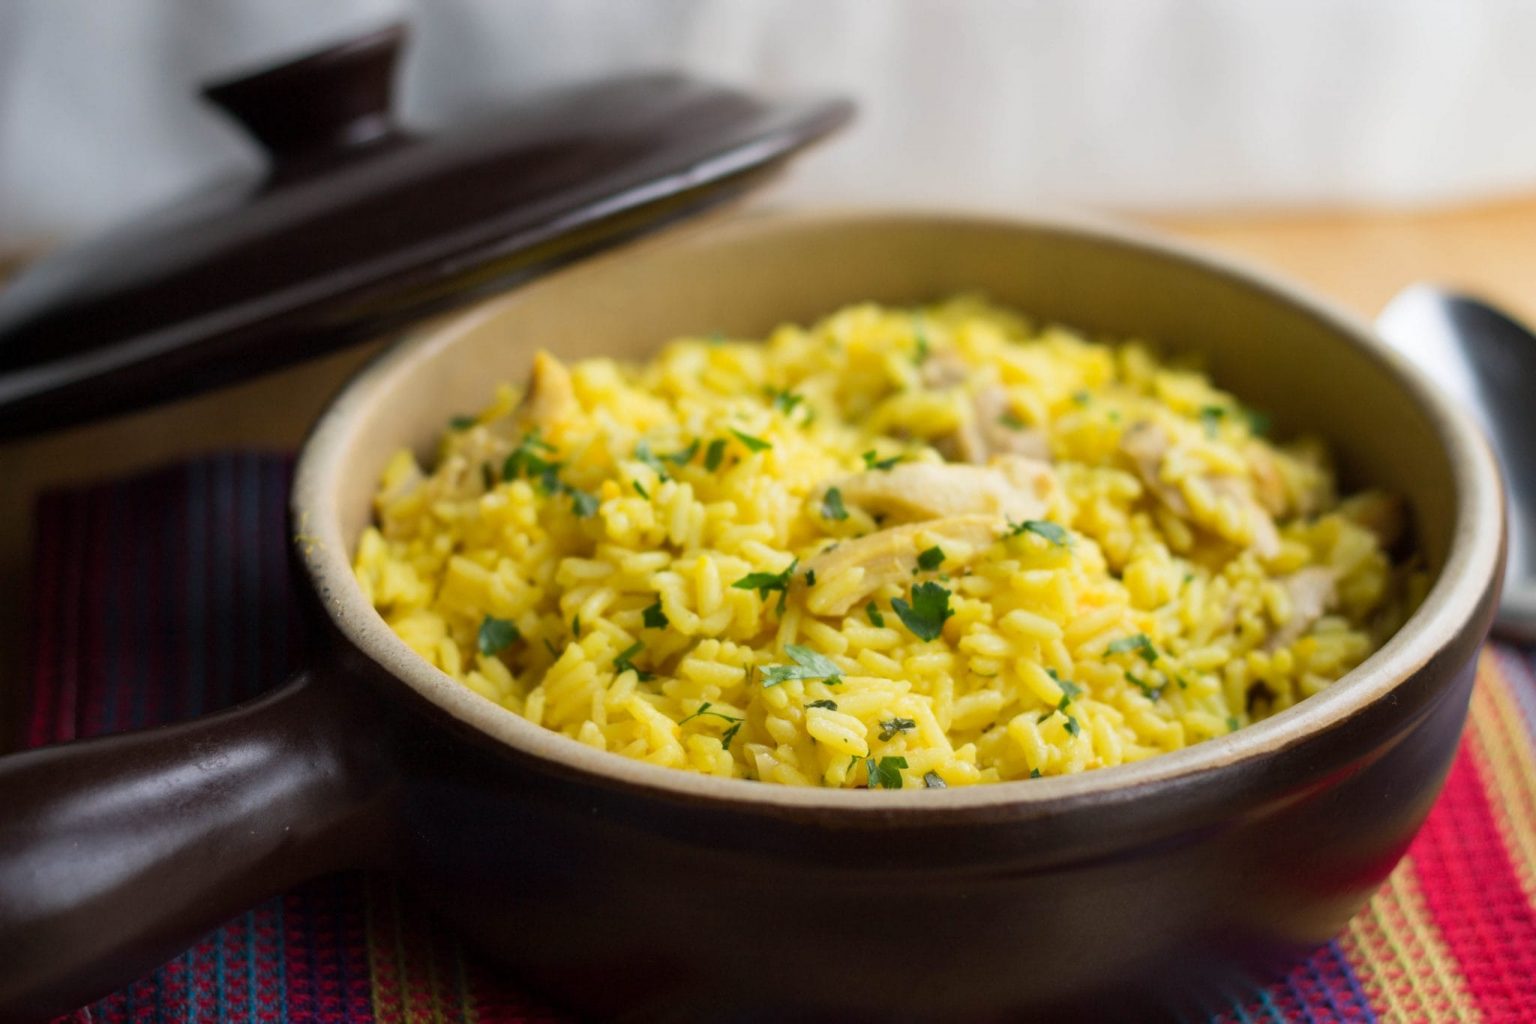 Easy Risotto with Chicken Breast Recipe - A Real Treat